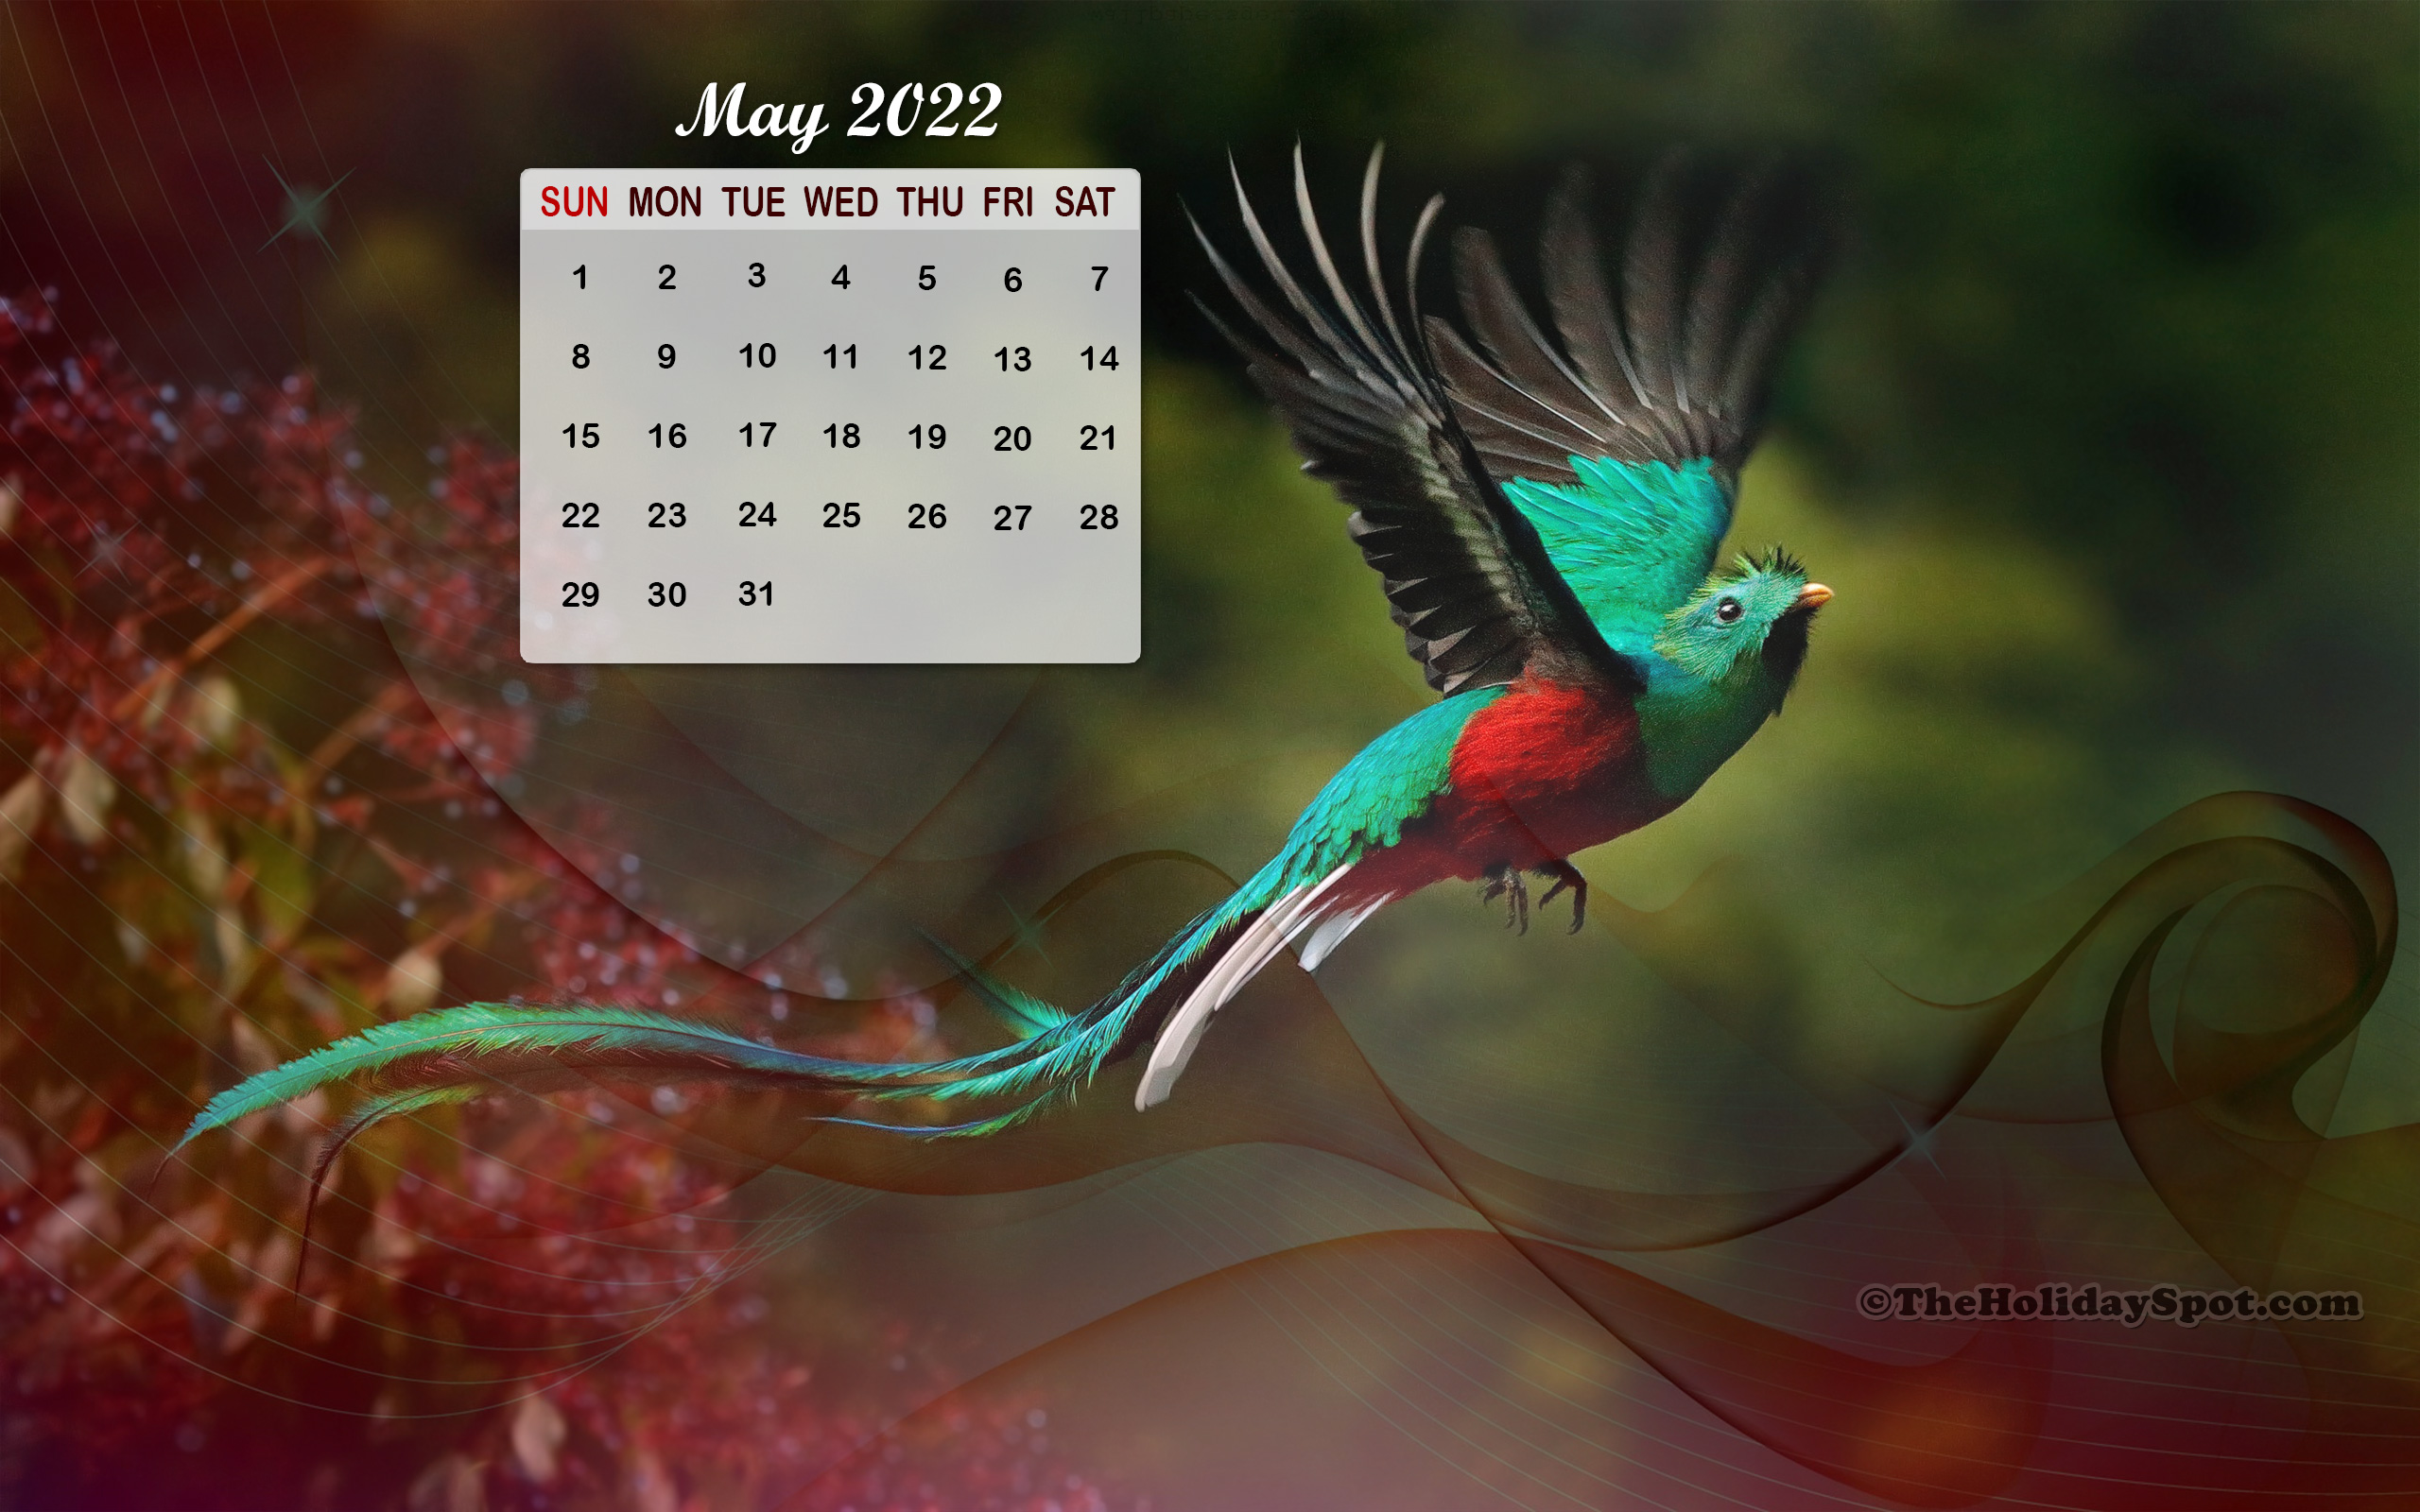 Month wise Calendar Wallpapers for 2022